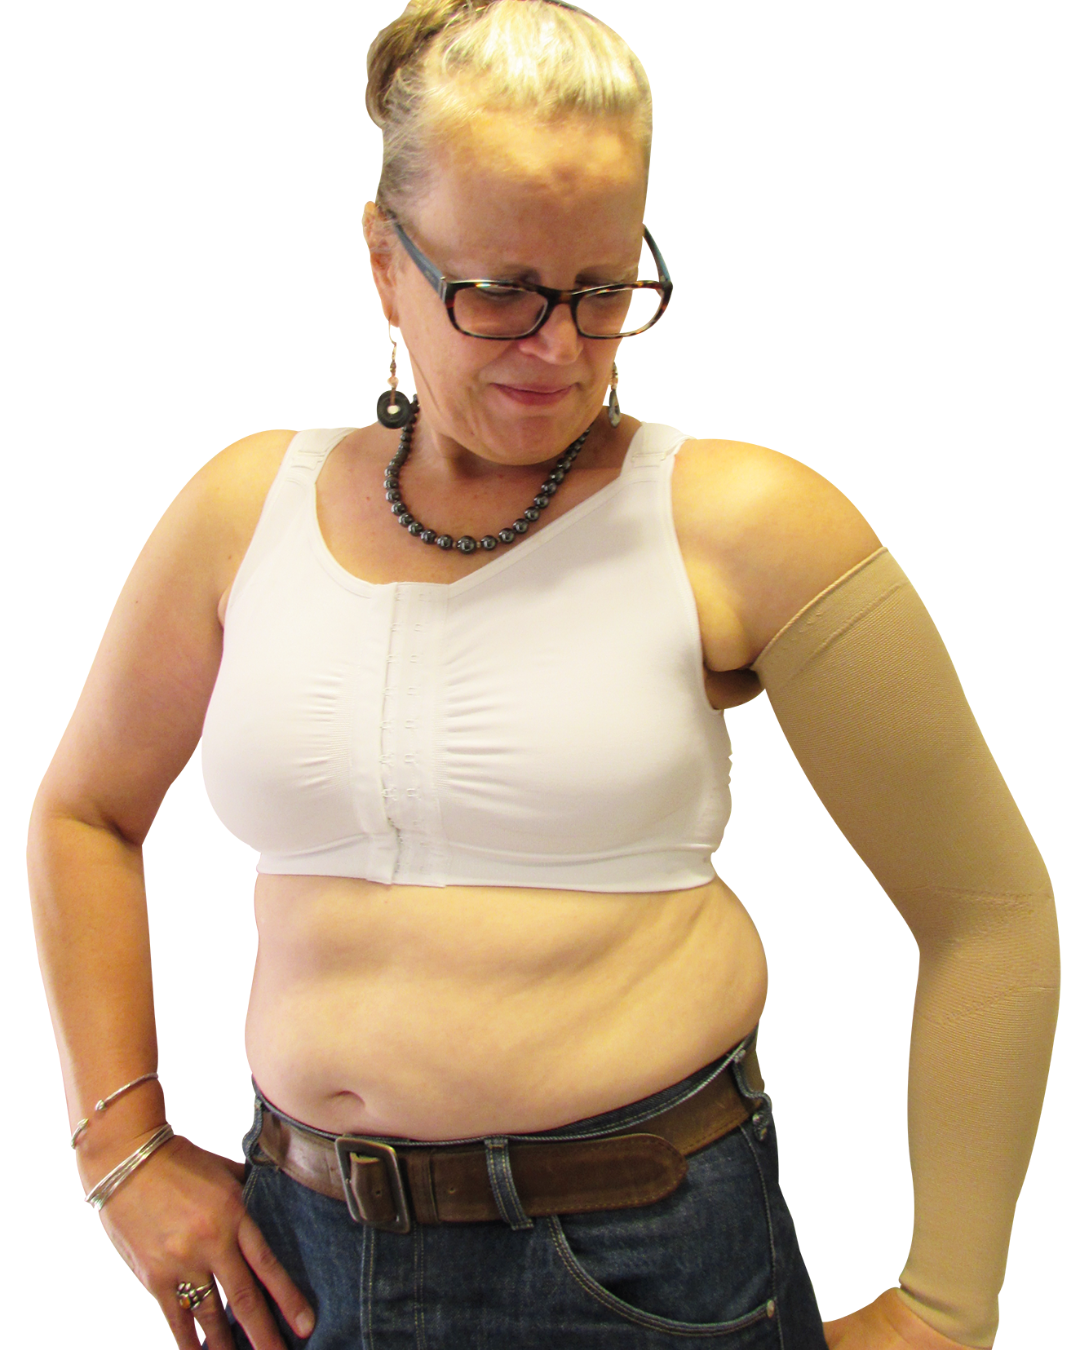 The Reco Bra® has been designed for the immediate post-surgery stage suitable for any types of breast cancer, cosmetic, plastic or cardio surgeries.